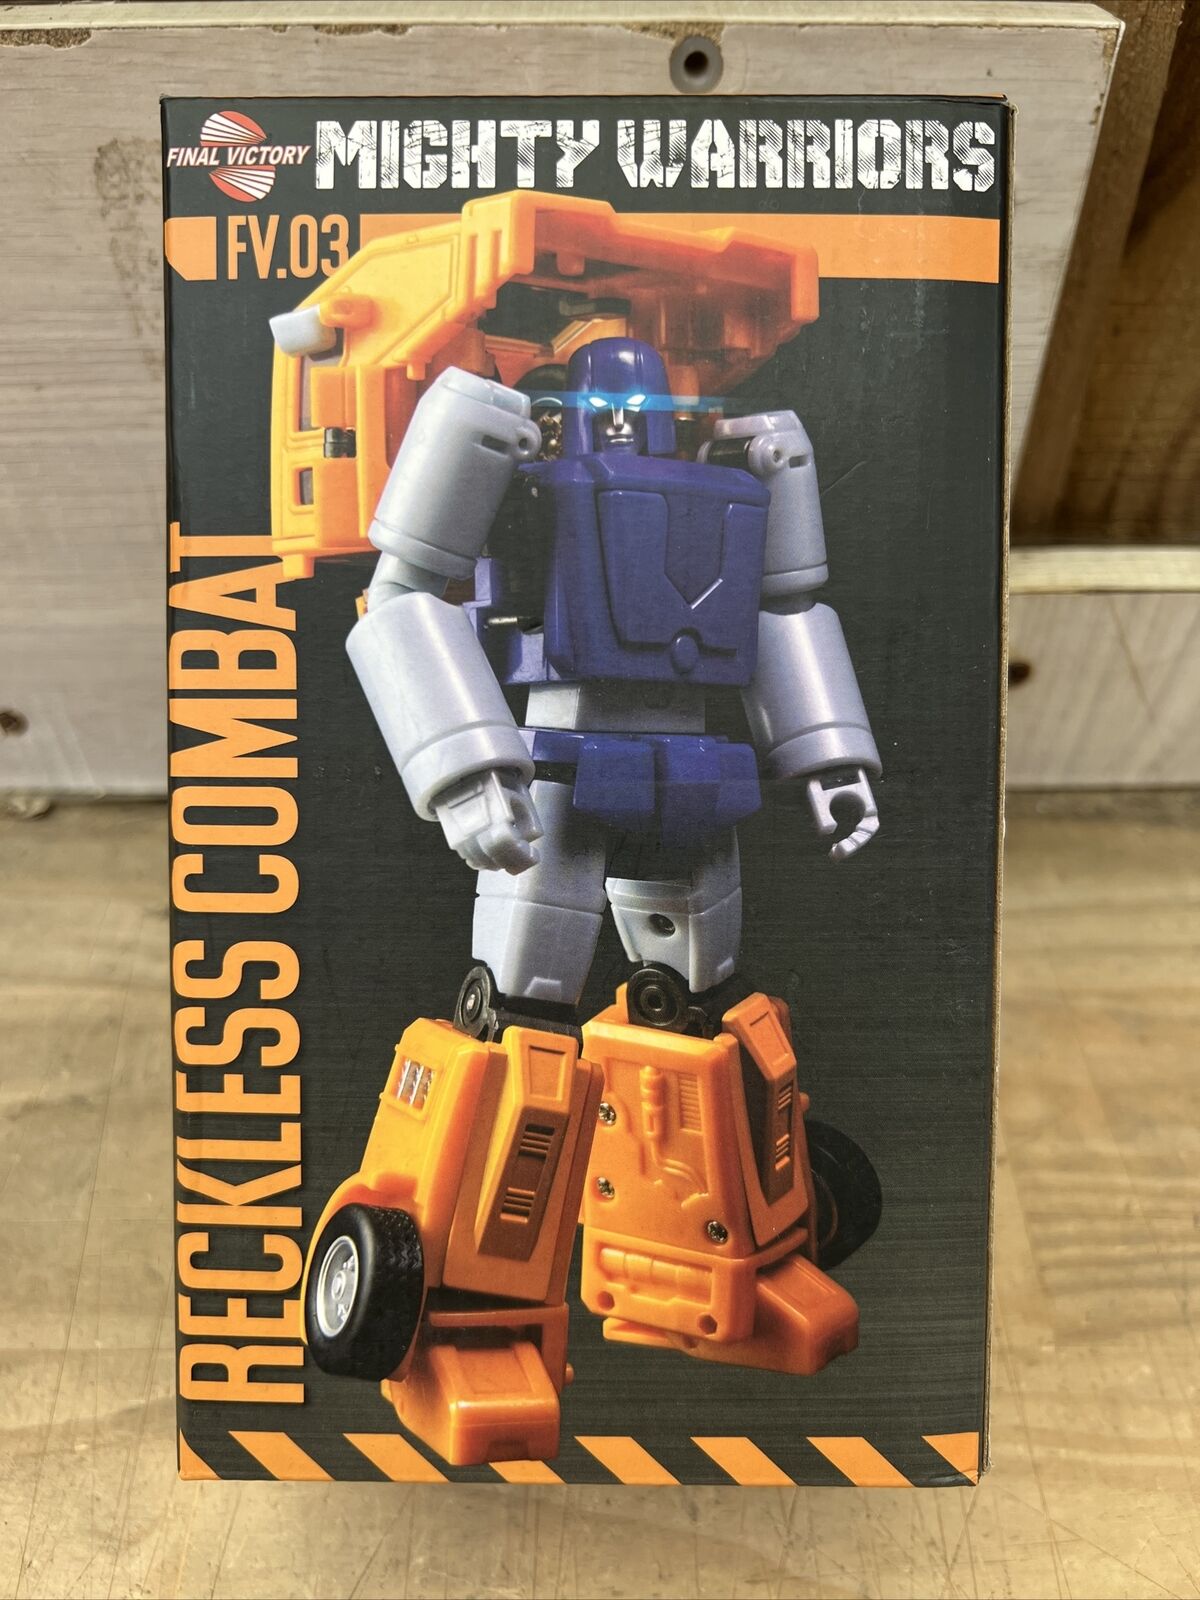 Final Victory Toys FV03 Mighty Warriors RECKLESS COMBAT New In Box